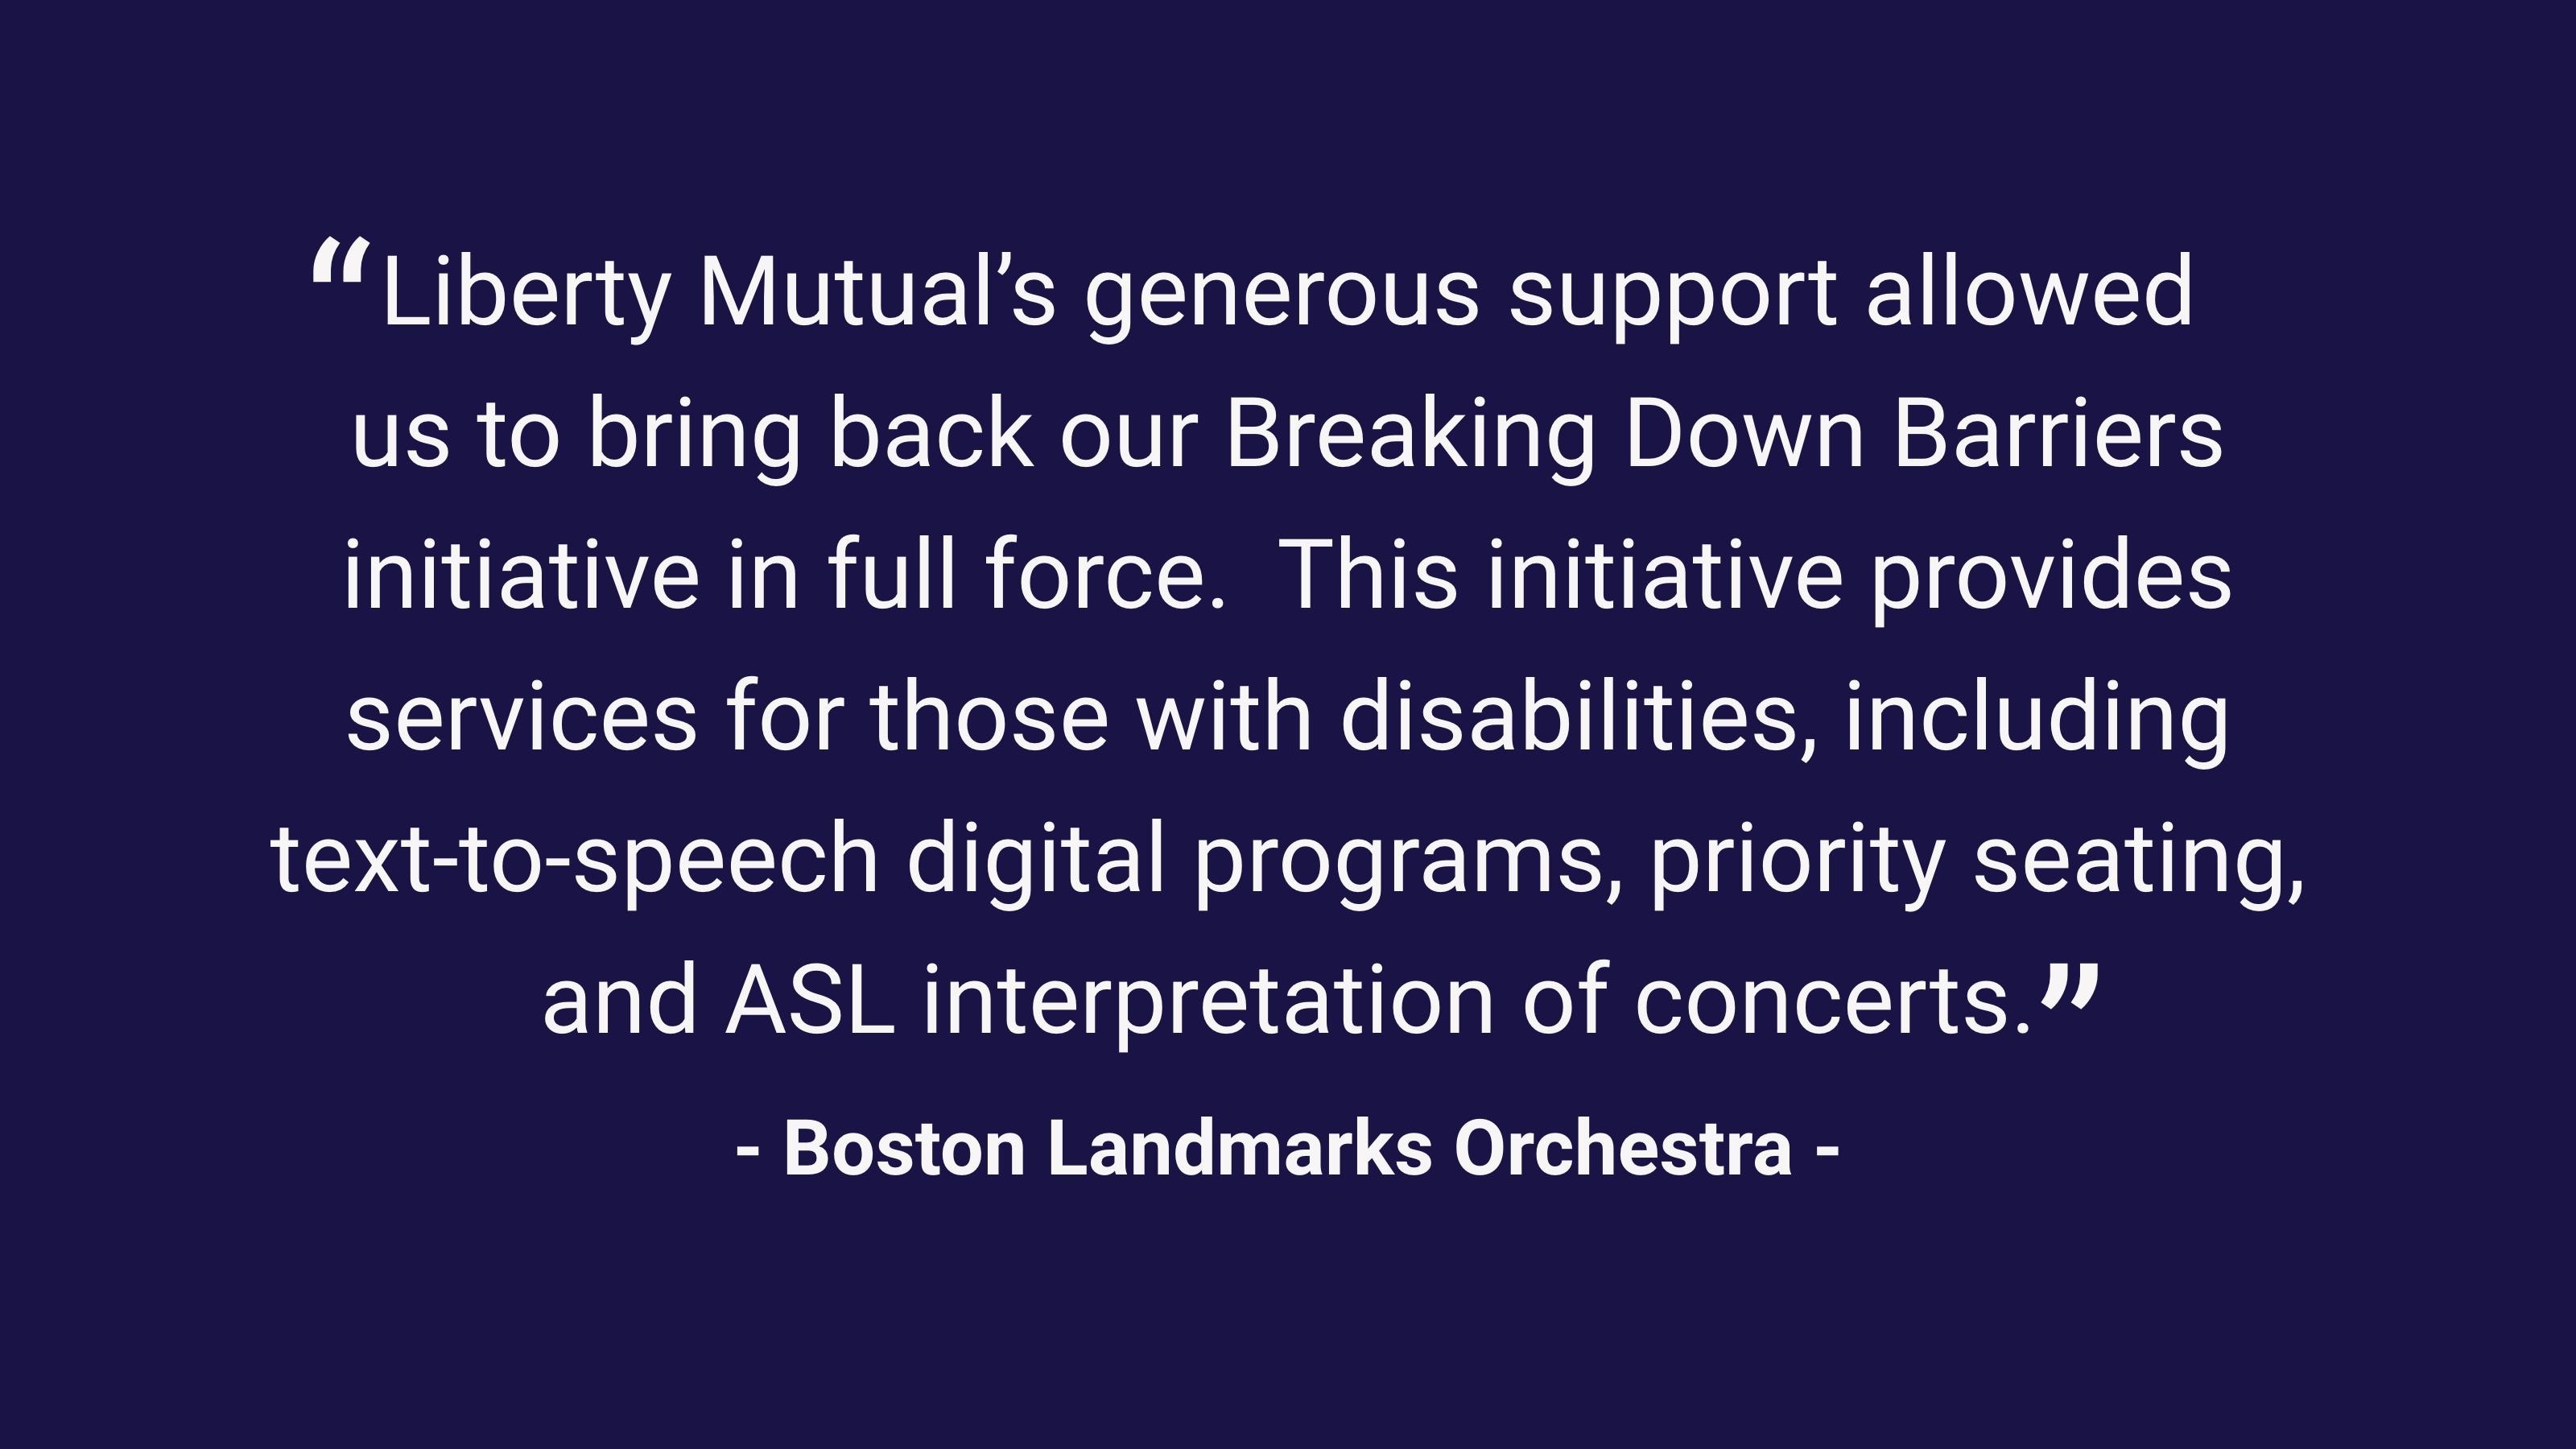 (slide 1 of 4) “Liberty Mutual’s generous support allowed us to bring back our Breaking Down Barriers initiative in full force.  This initiative provides services for those with disabilities, including text-to-speech digital programs, priority seating, and ASL interpretation of concerts.”  – Boston Landmarks Orchestra . 